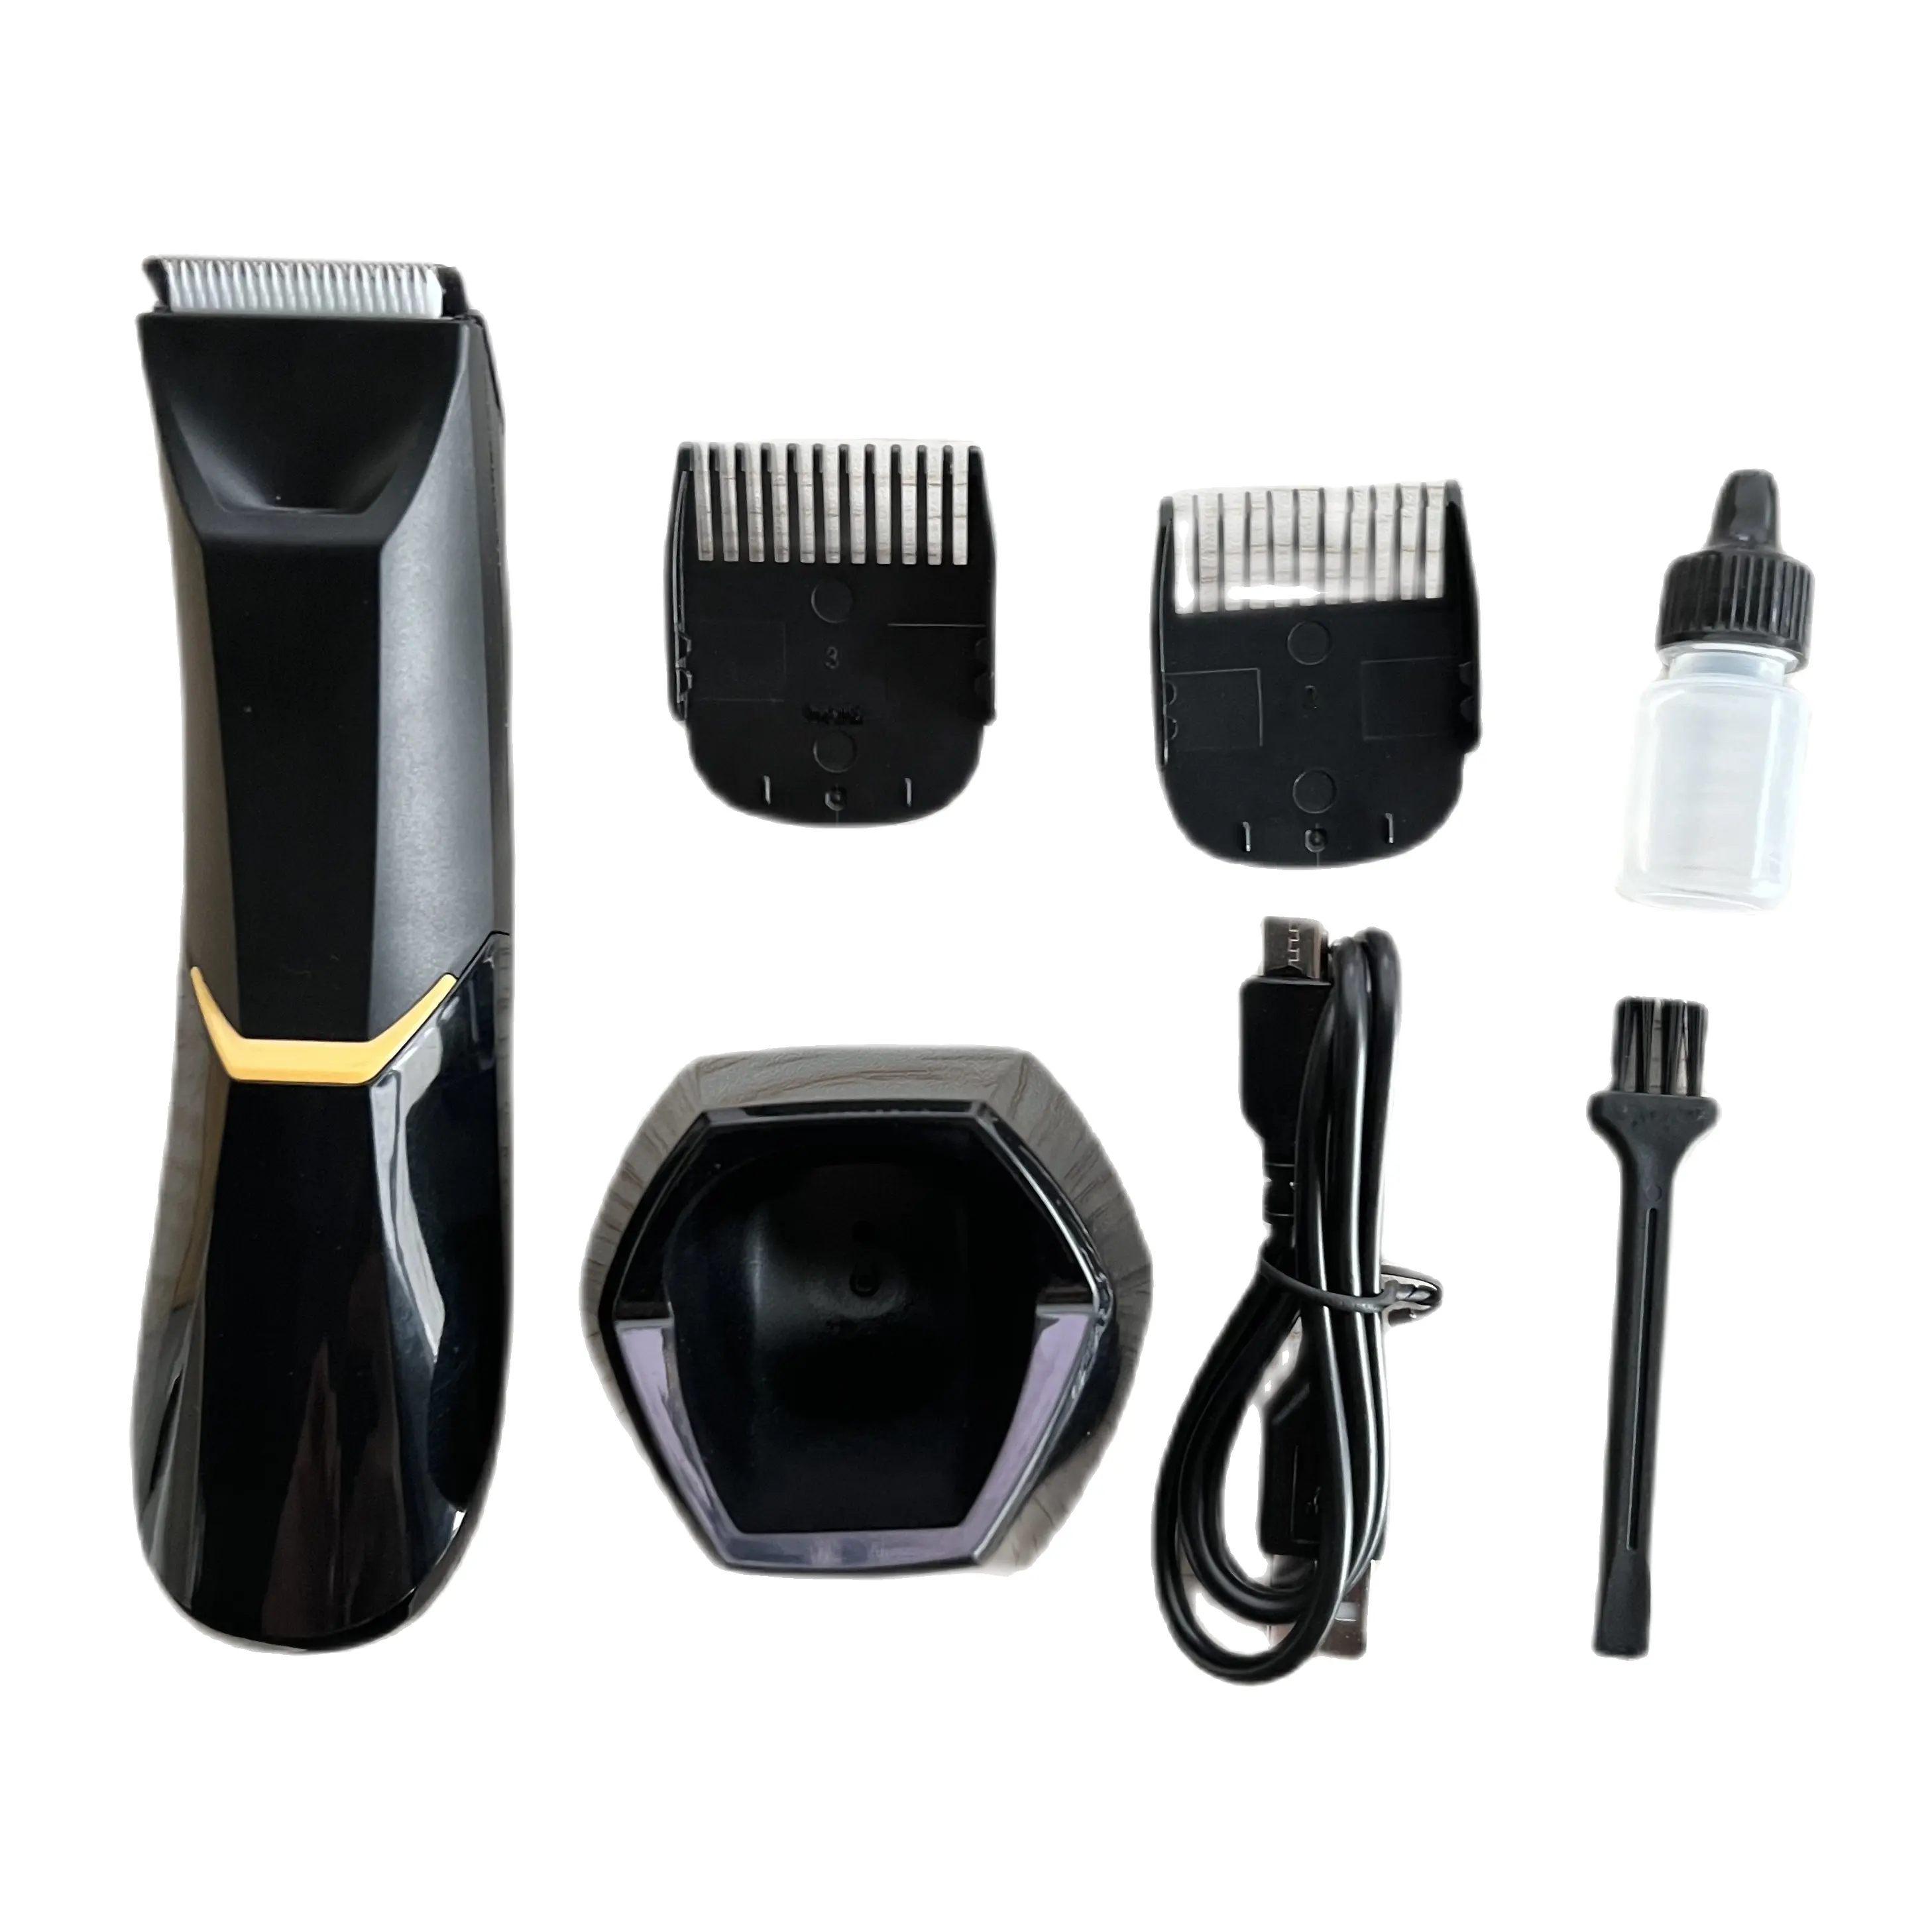 Waterproof ceramic blade Body shaver Hair Trimmer painless face bikini electric groomer Groin pubic Hair Clippers for men